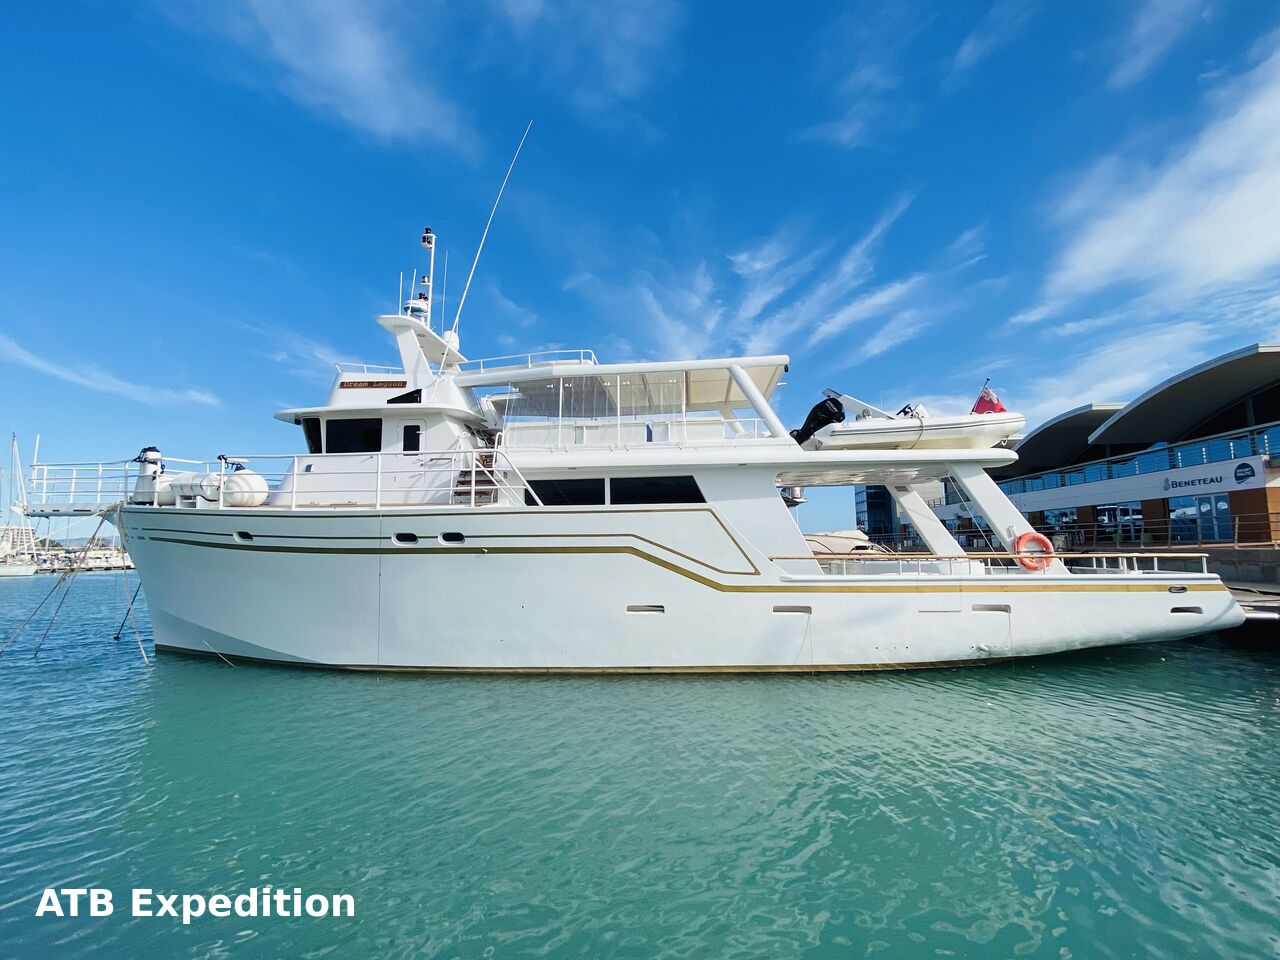 Expedition Yacht ATB Shipyards